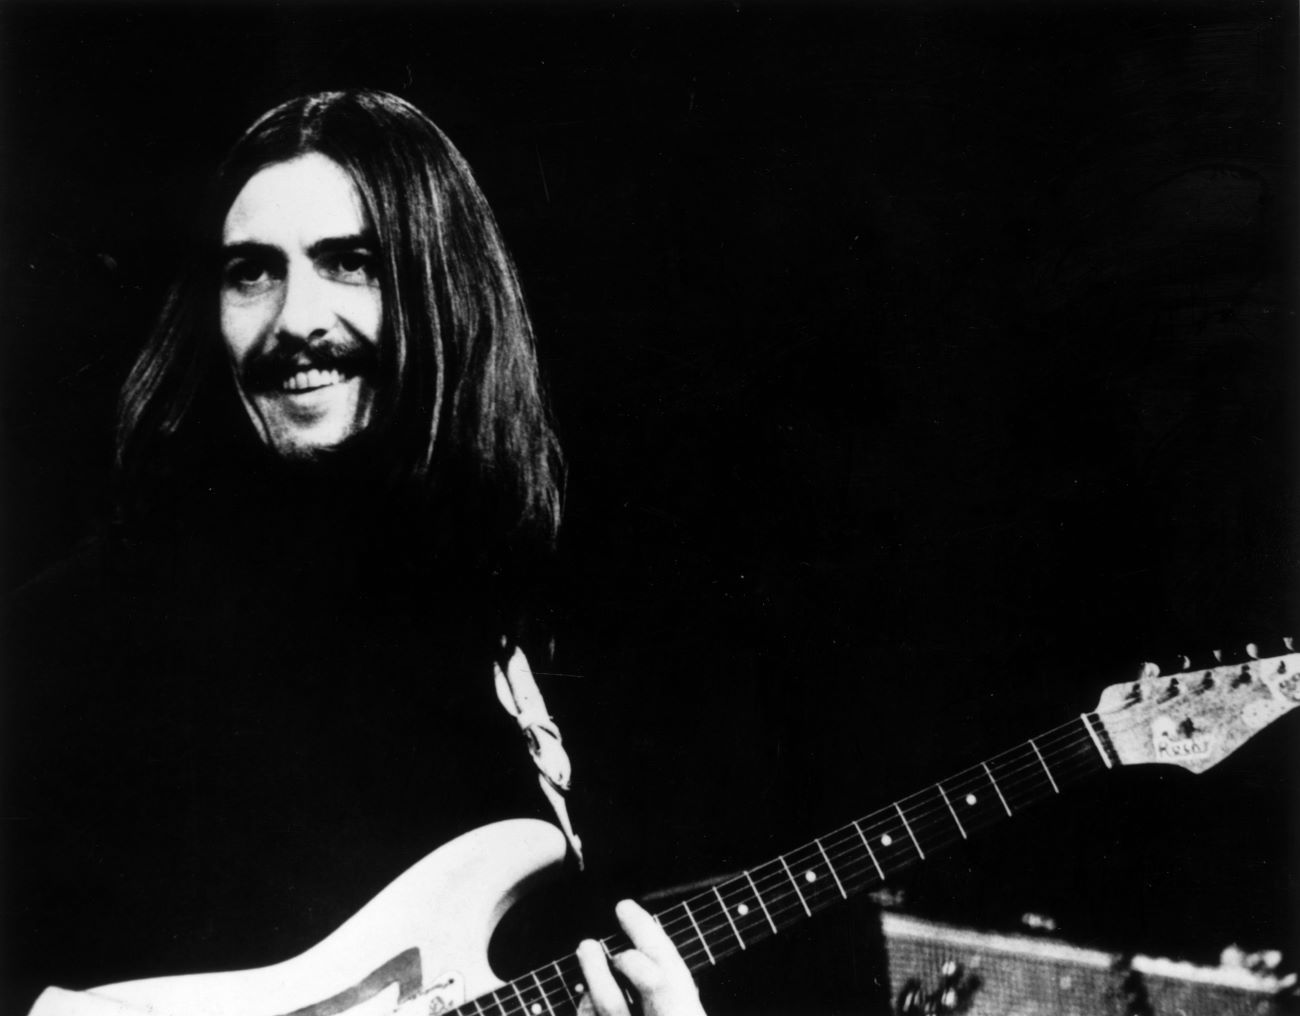 A black and white picture of George Harrison with a guitar.